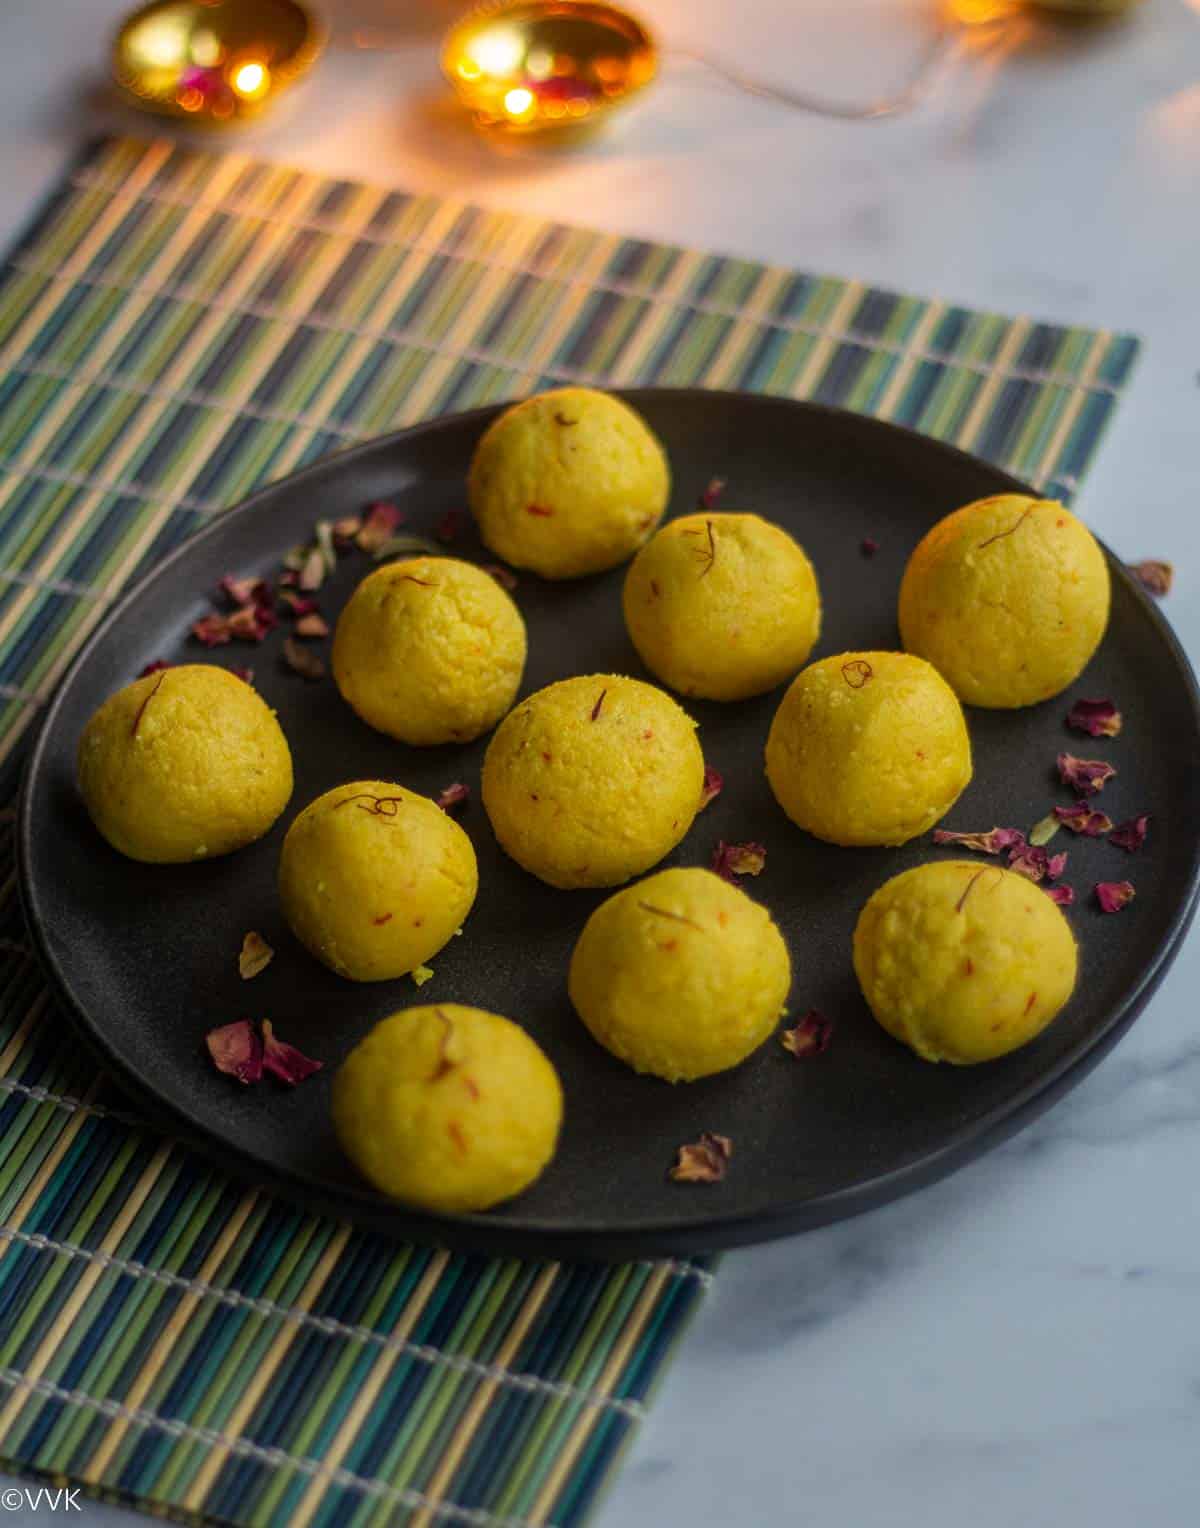 malai laddu served in ceramic plate garnished with rose petals placed on a green mat